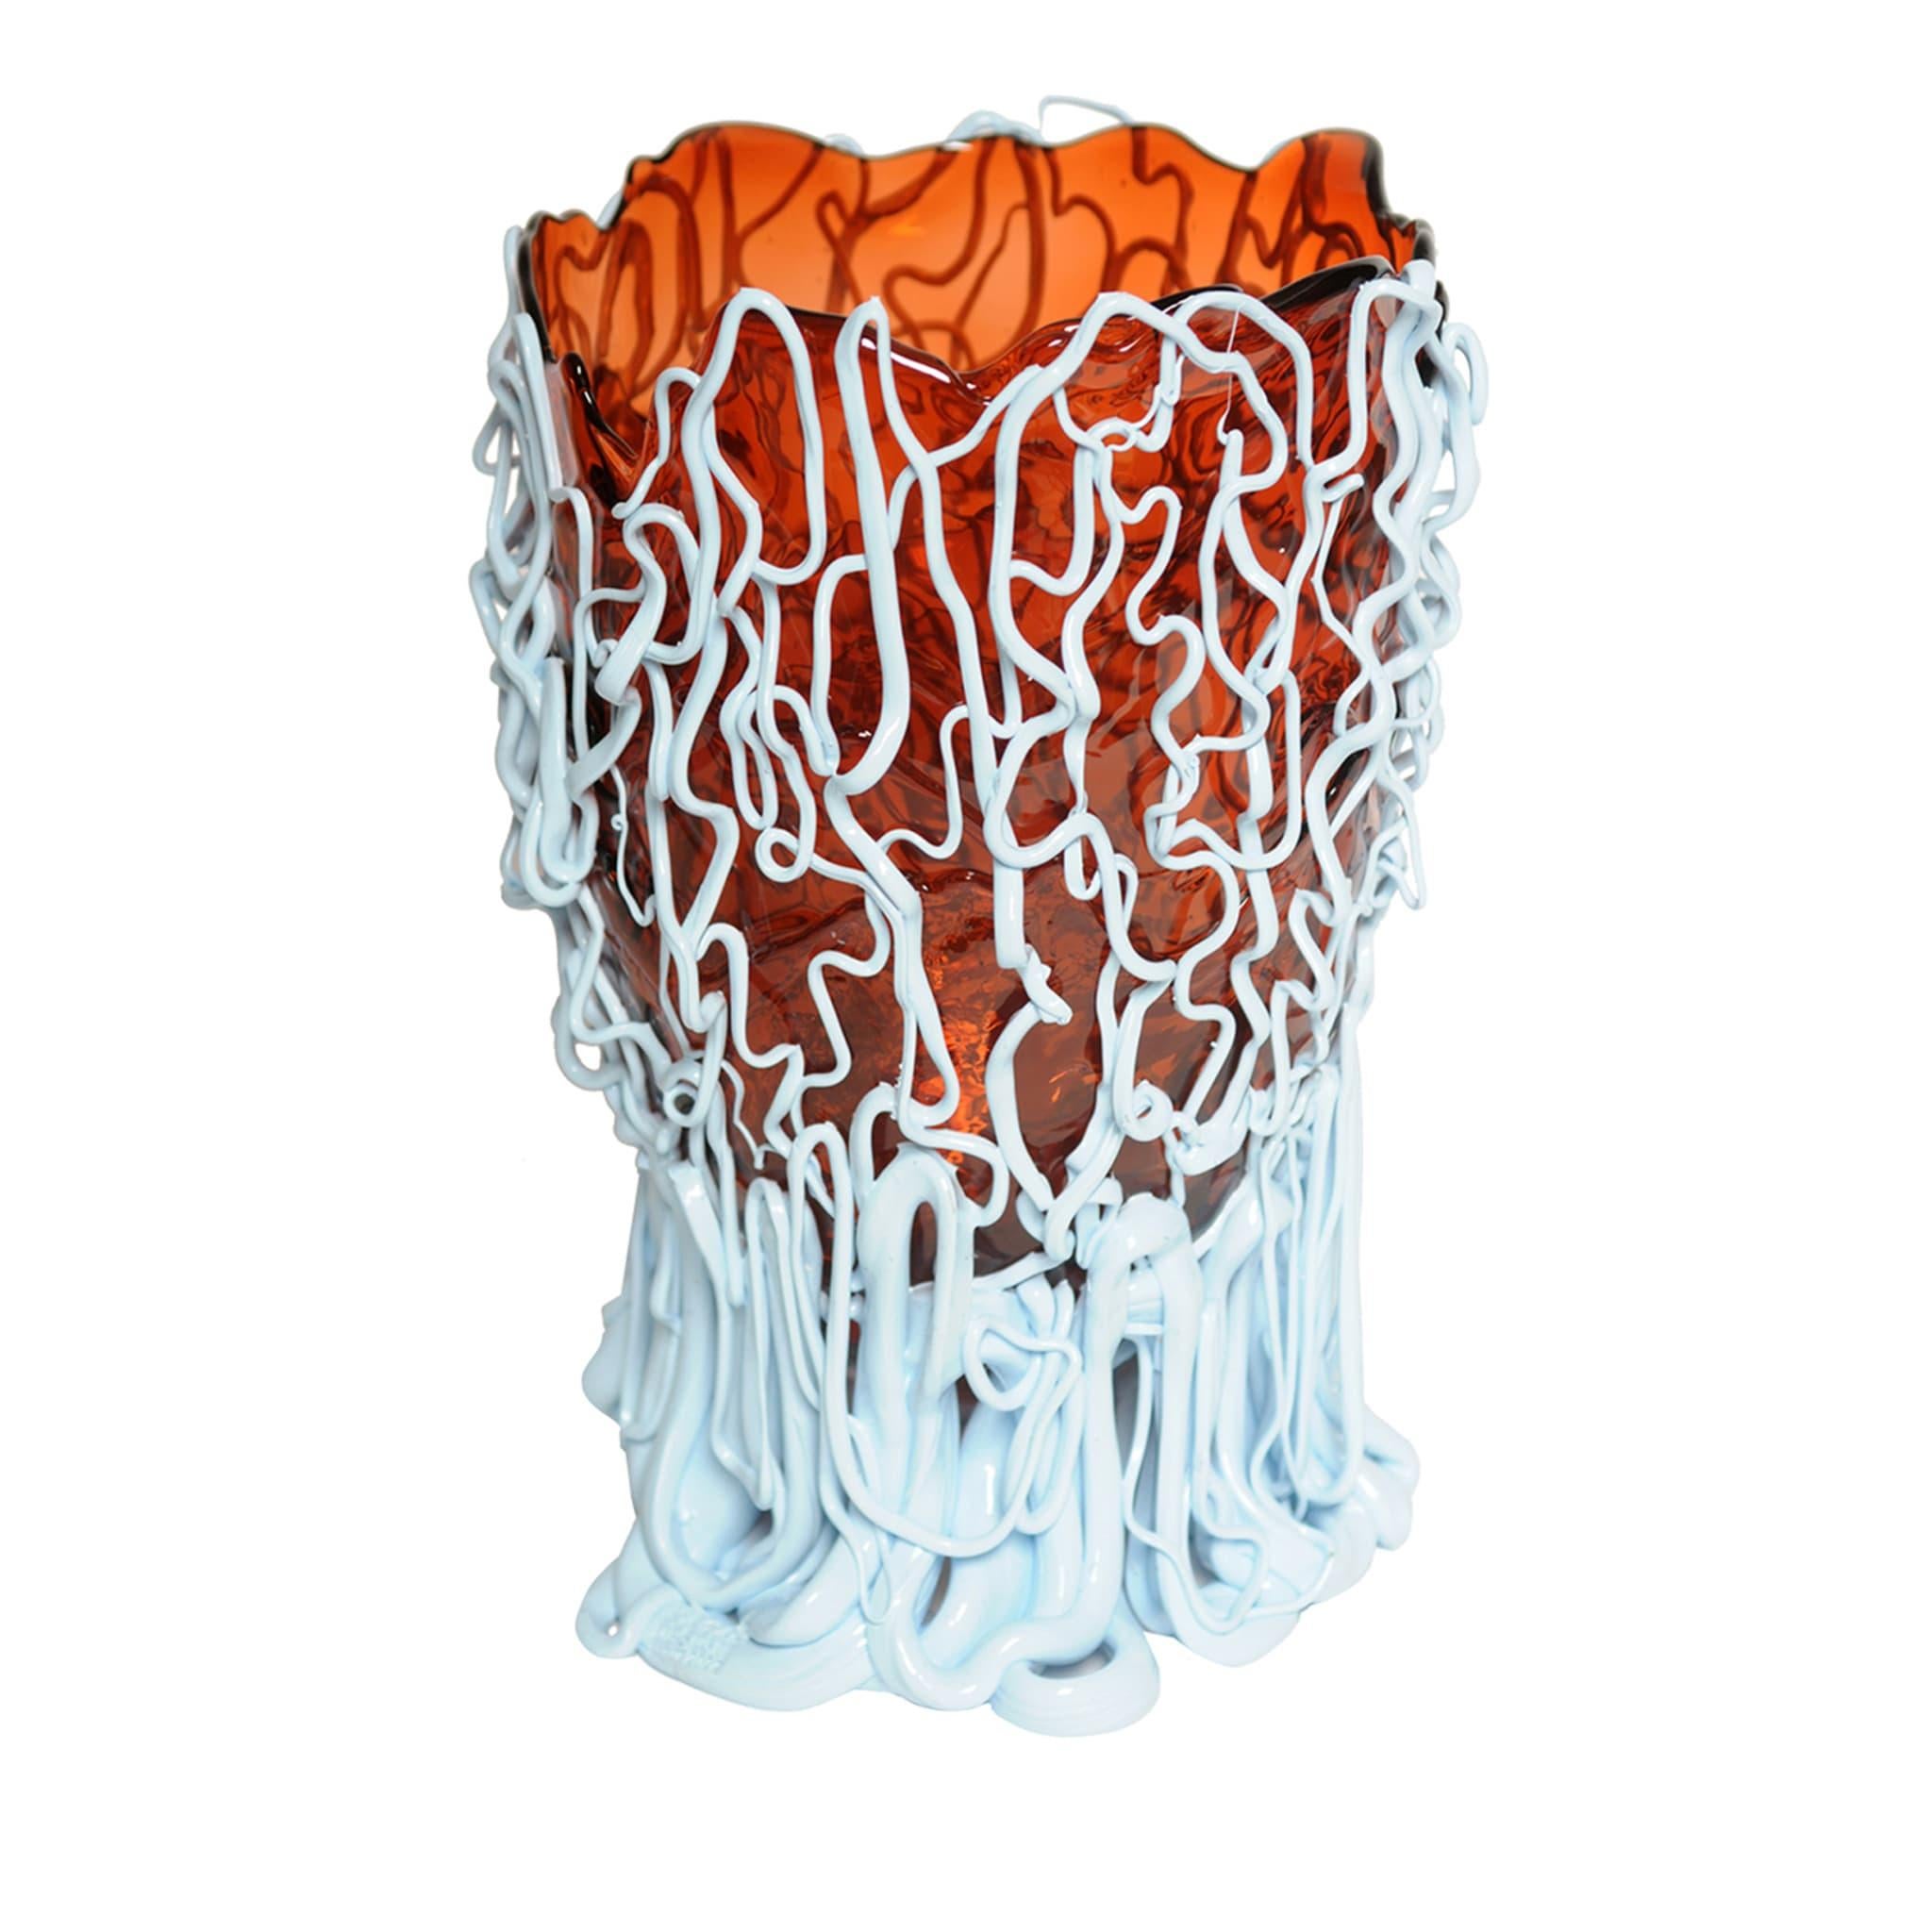 Vase in soft resin designed by Gaetano Pesce in 1995 for Fish Design collection.